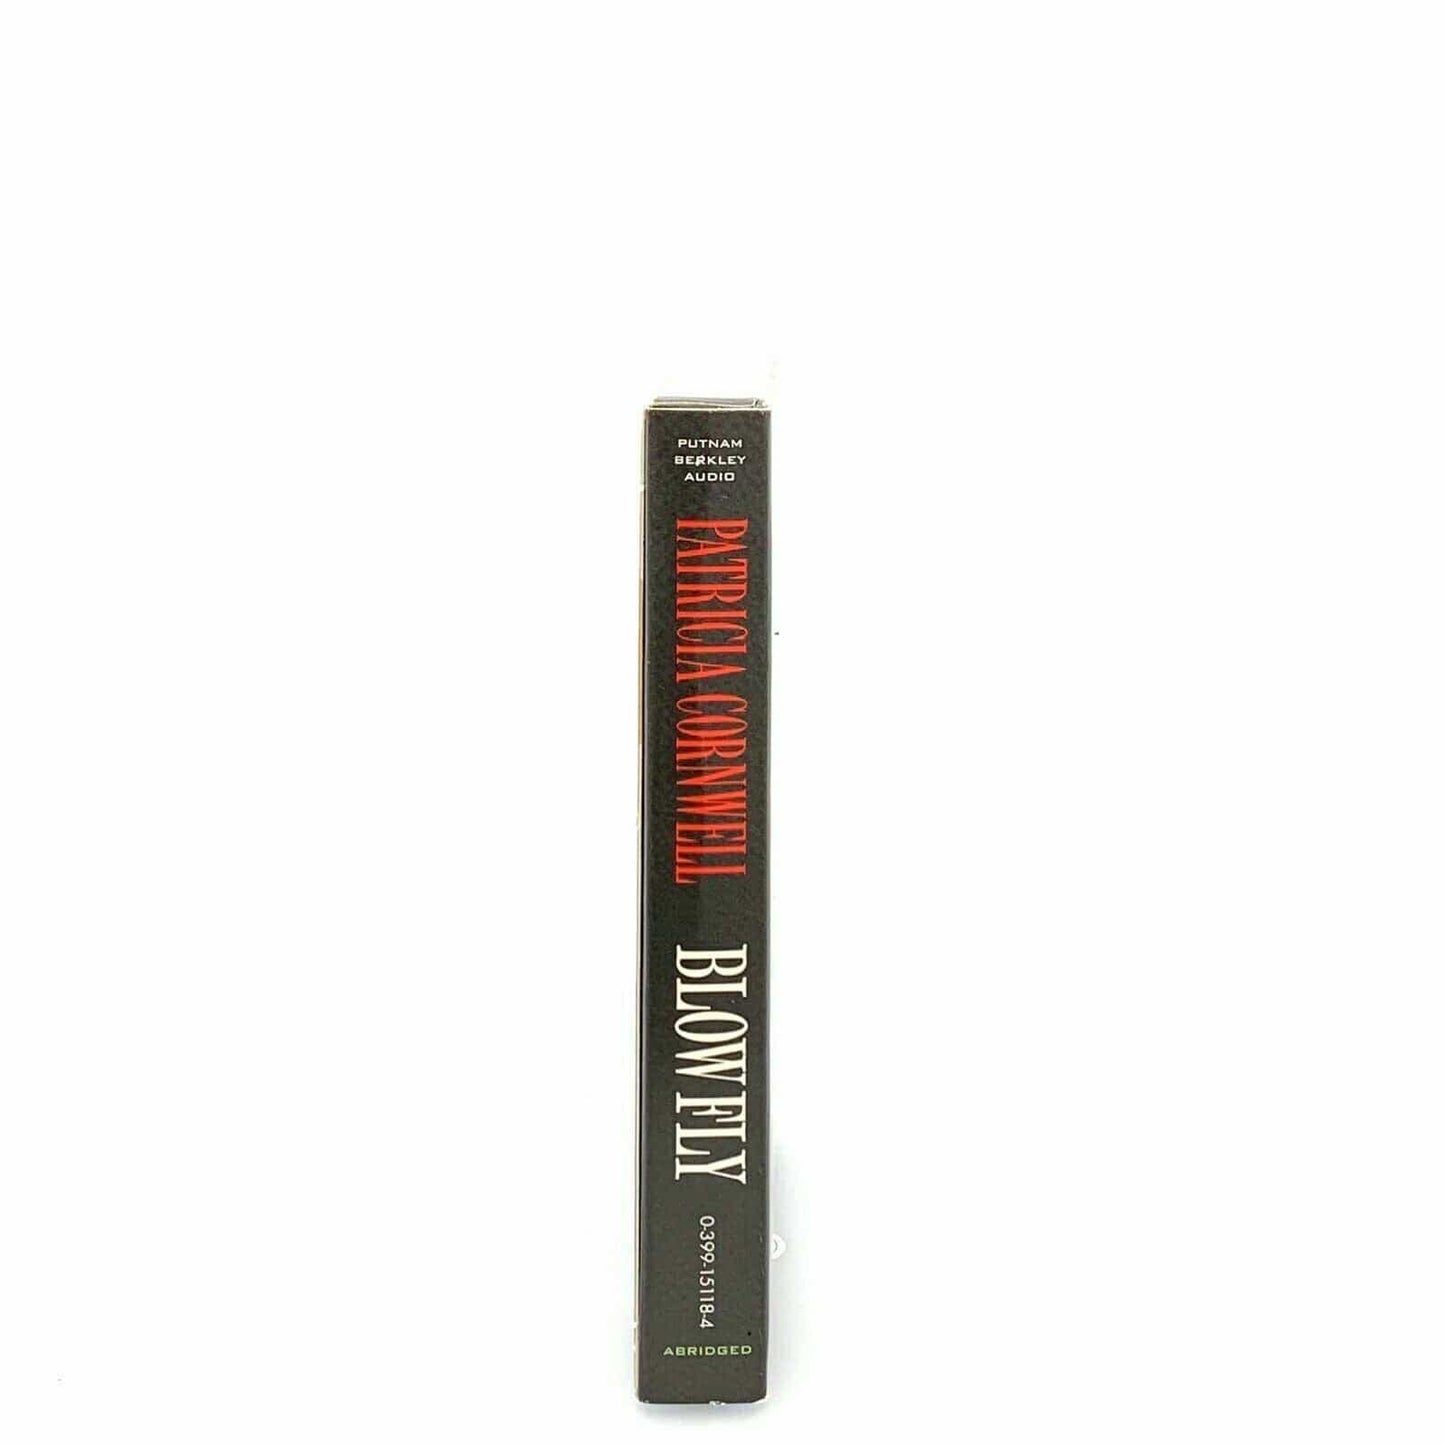 A Scarpetta Novel Ser.: Blow Fly by Patricia Cornwell (2003, Compact Disc,...